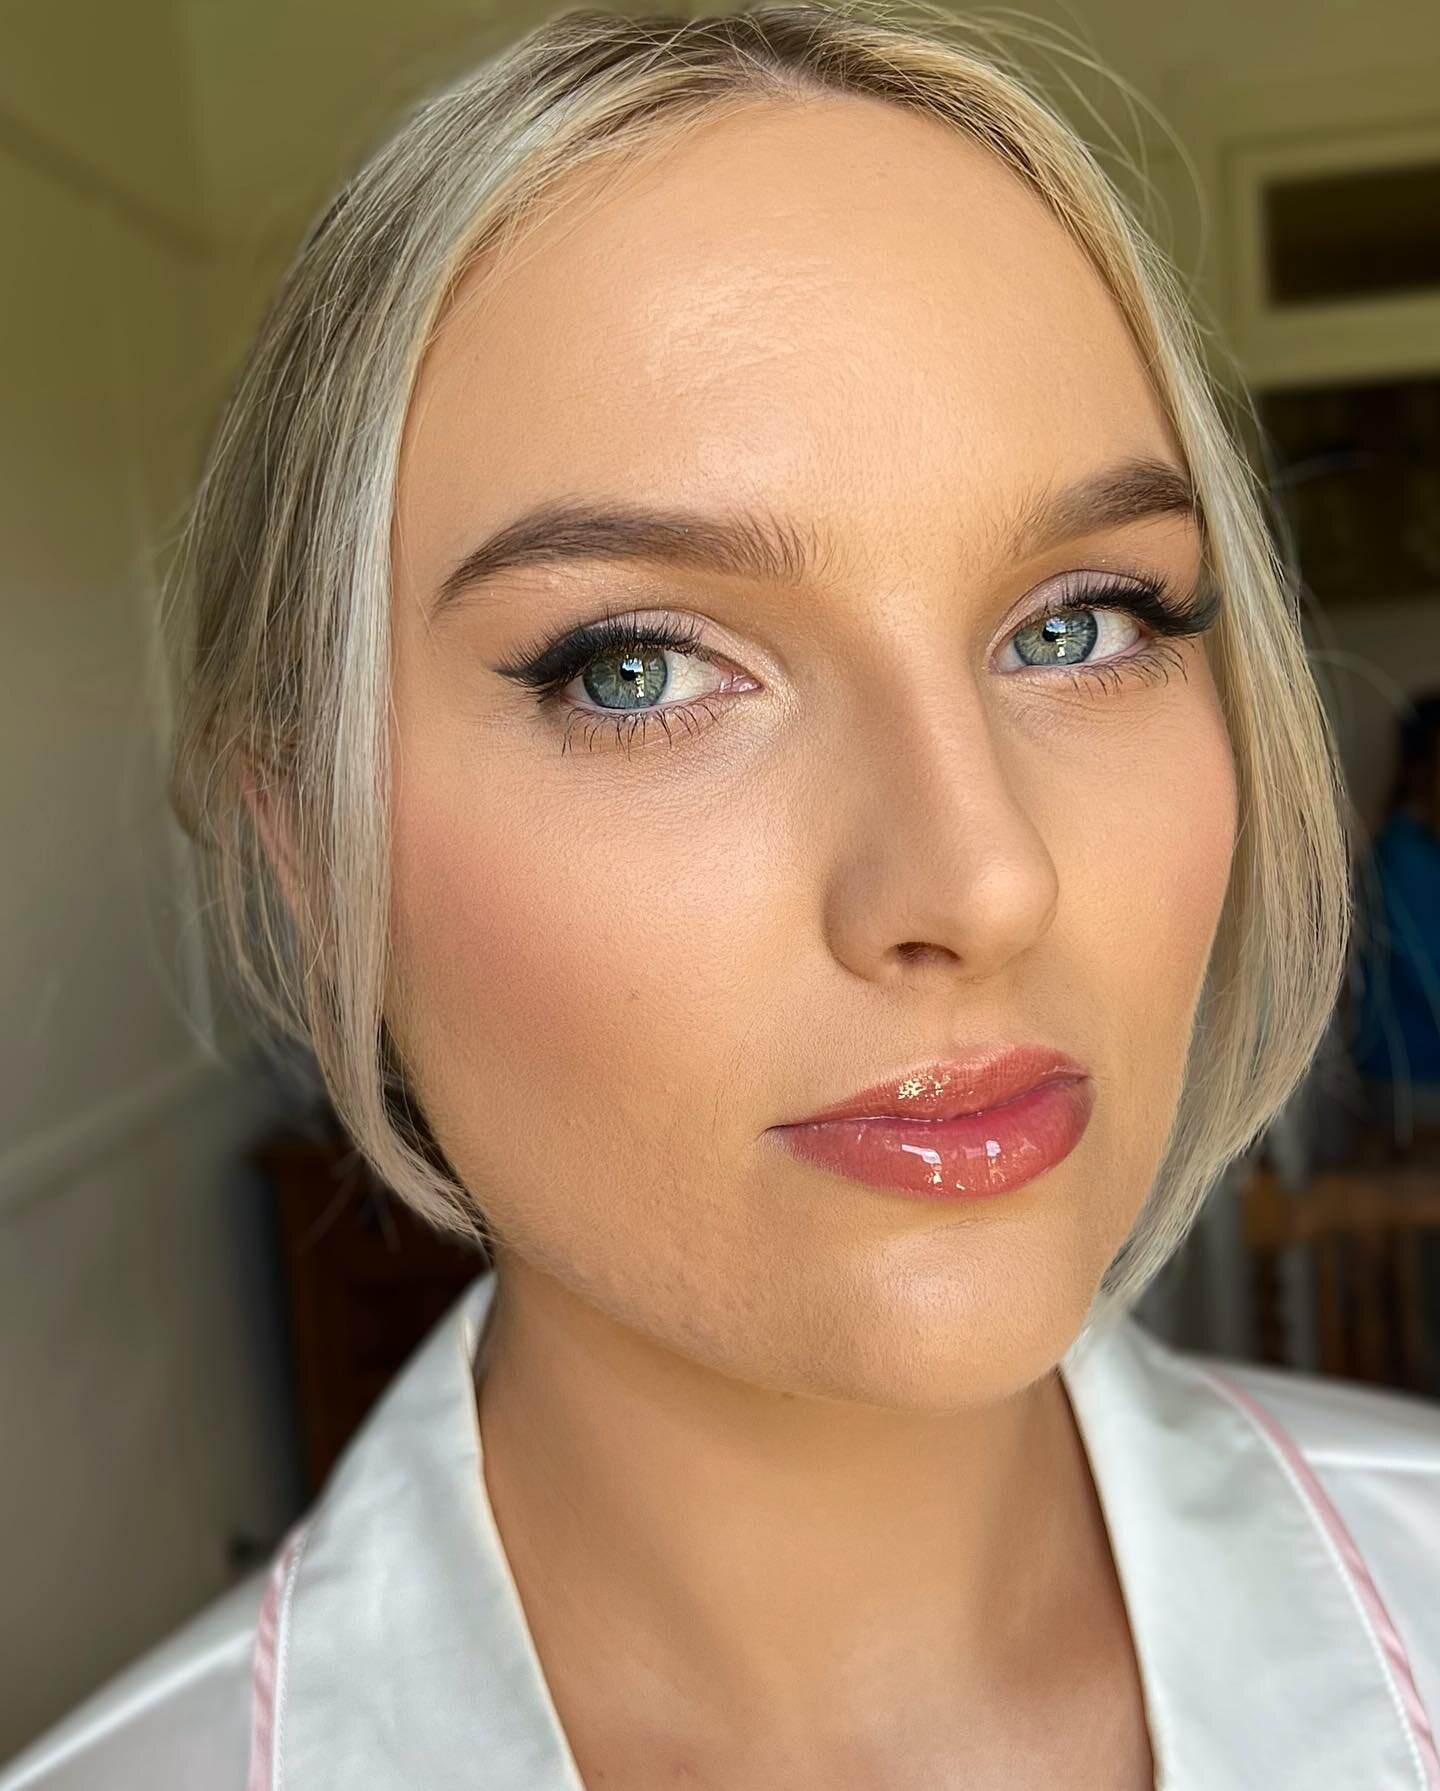 All for letting the wing be your statement piece when it comes to your wedding day makeup. Congratulations Beautiful Charley! 

Key products: 
@hourglasscosmetics Veil Primer
@charlottetilbury Airbrush flawless Foundation 
@westmanatelier Baby Cheeks